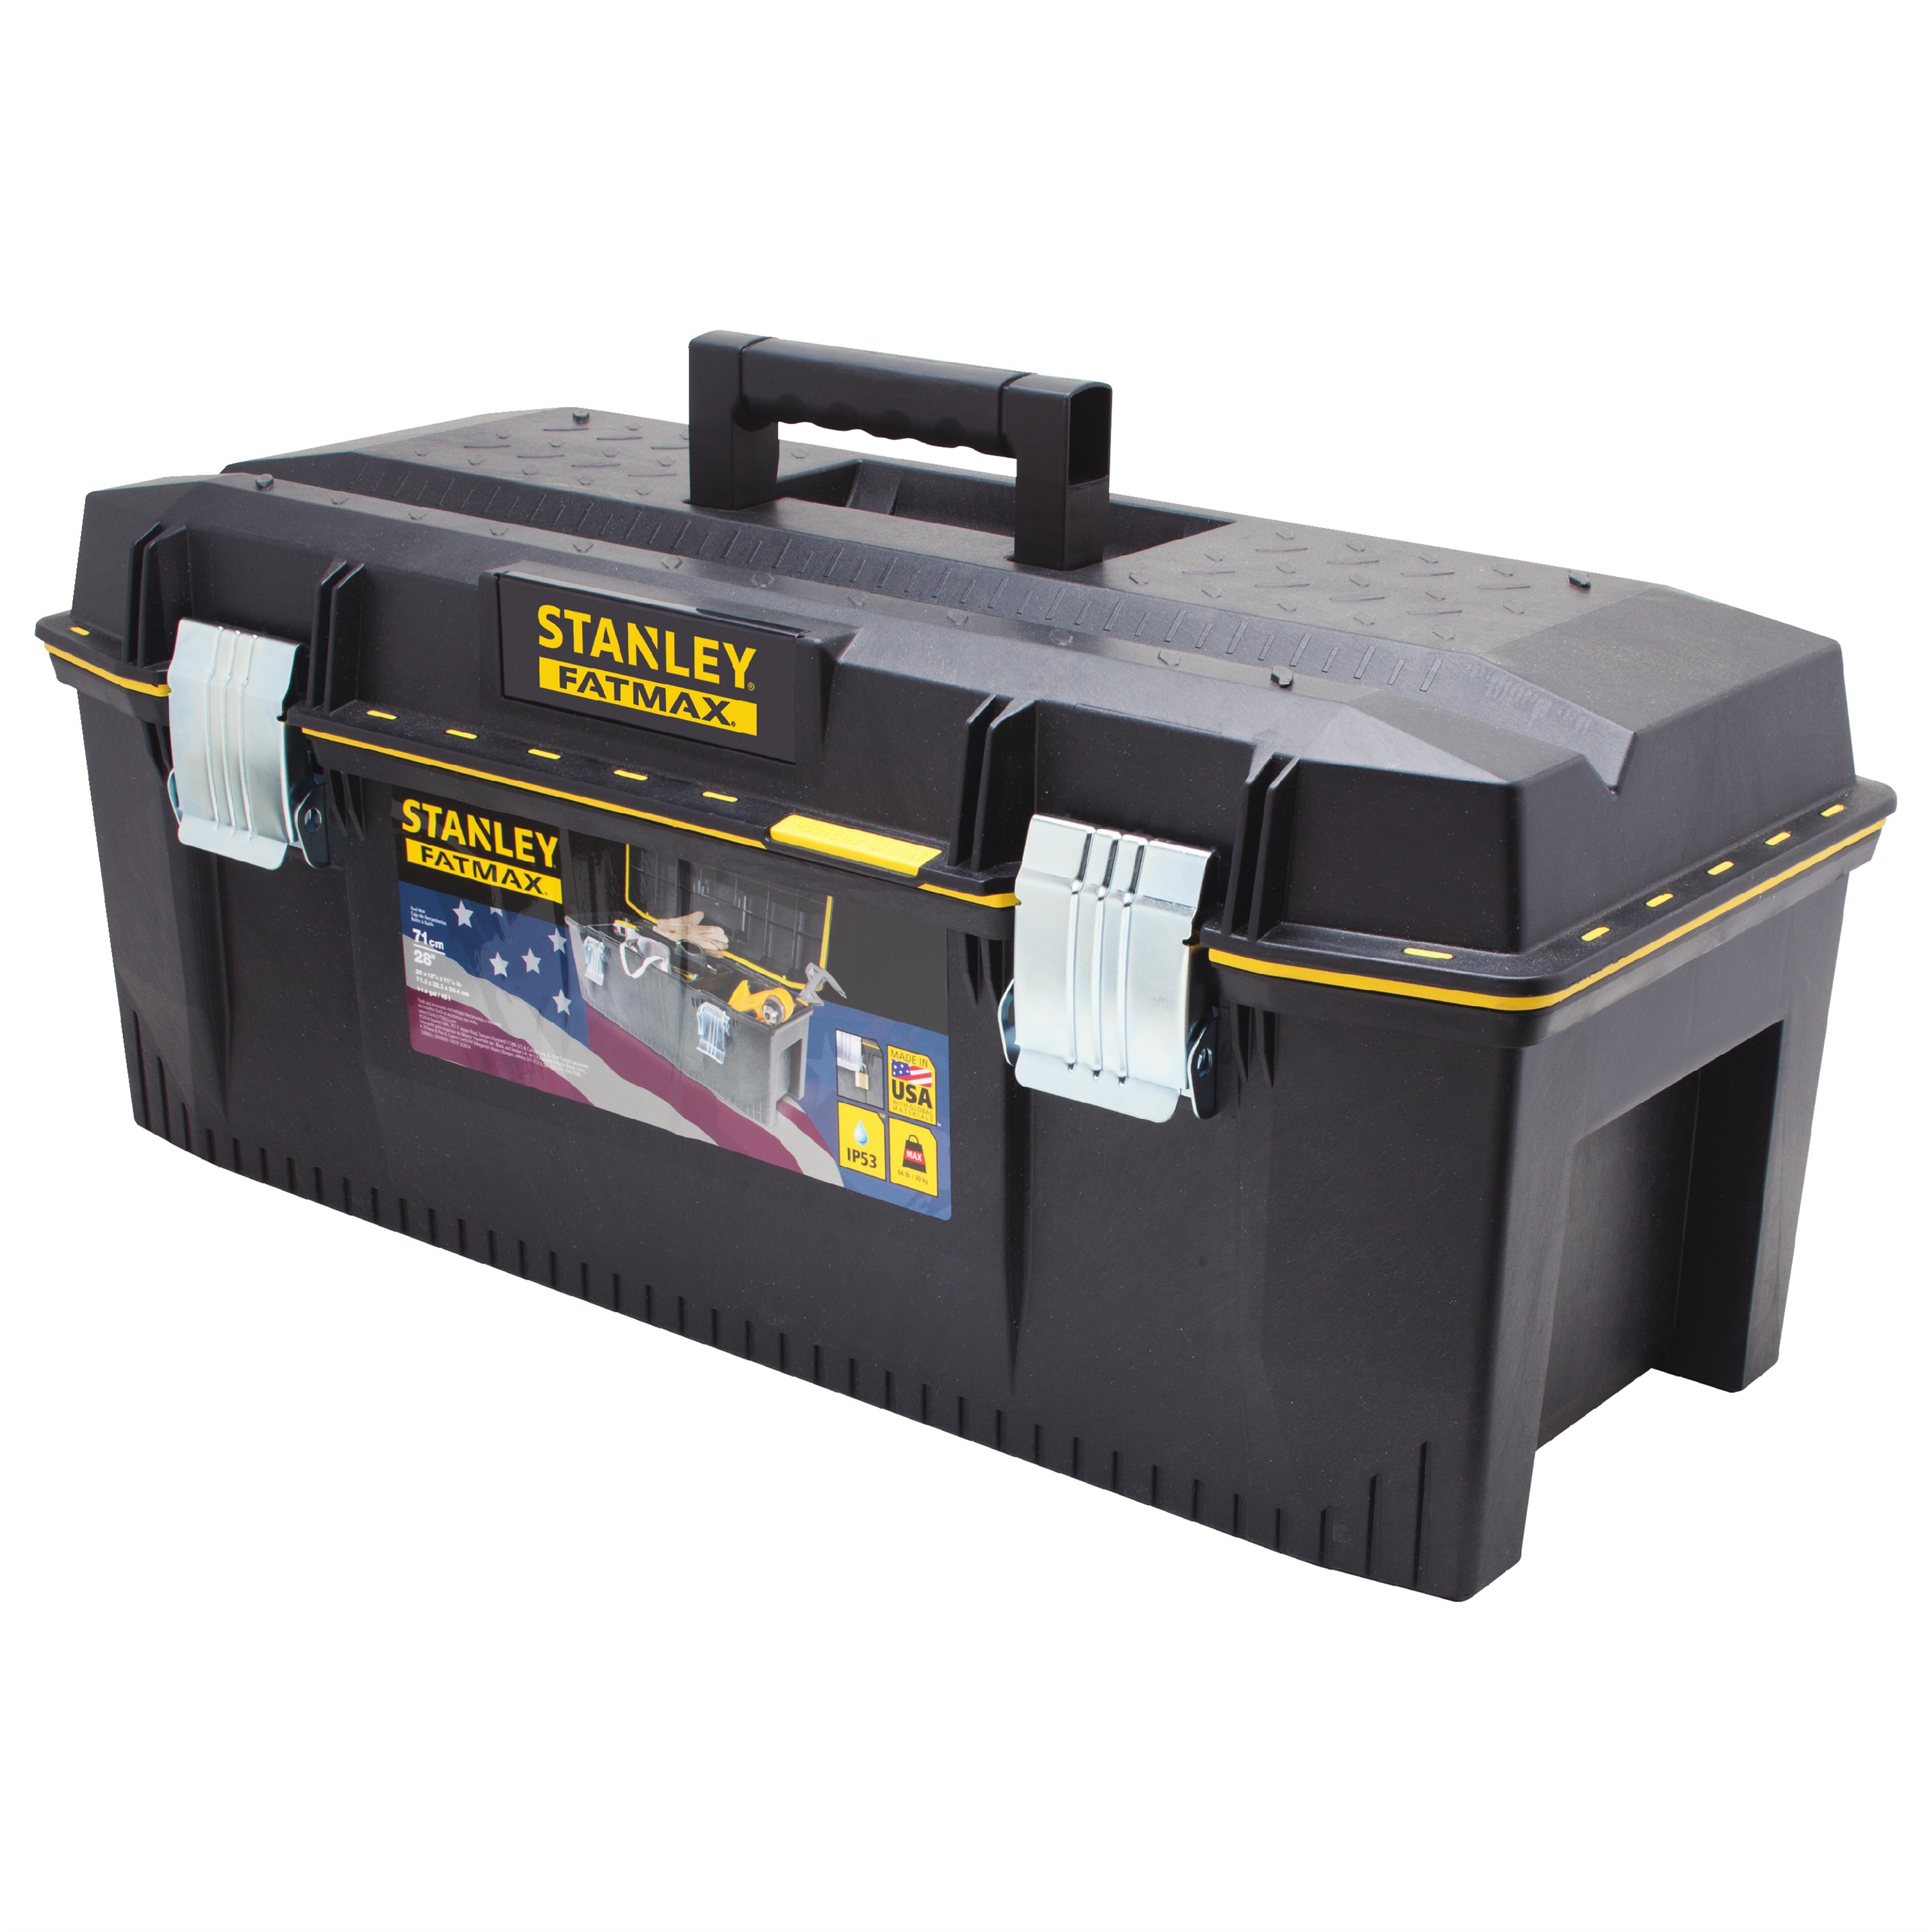 STANLEY FATMAX 028001L Structural Foam Tool Box, 28 In. - image 1 of 3